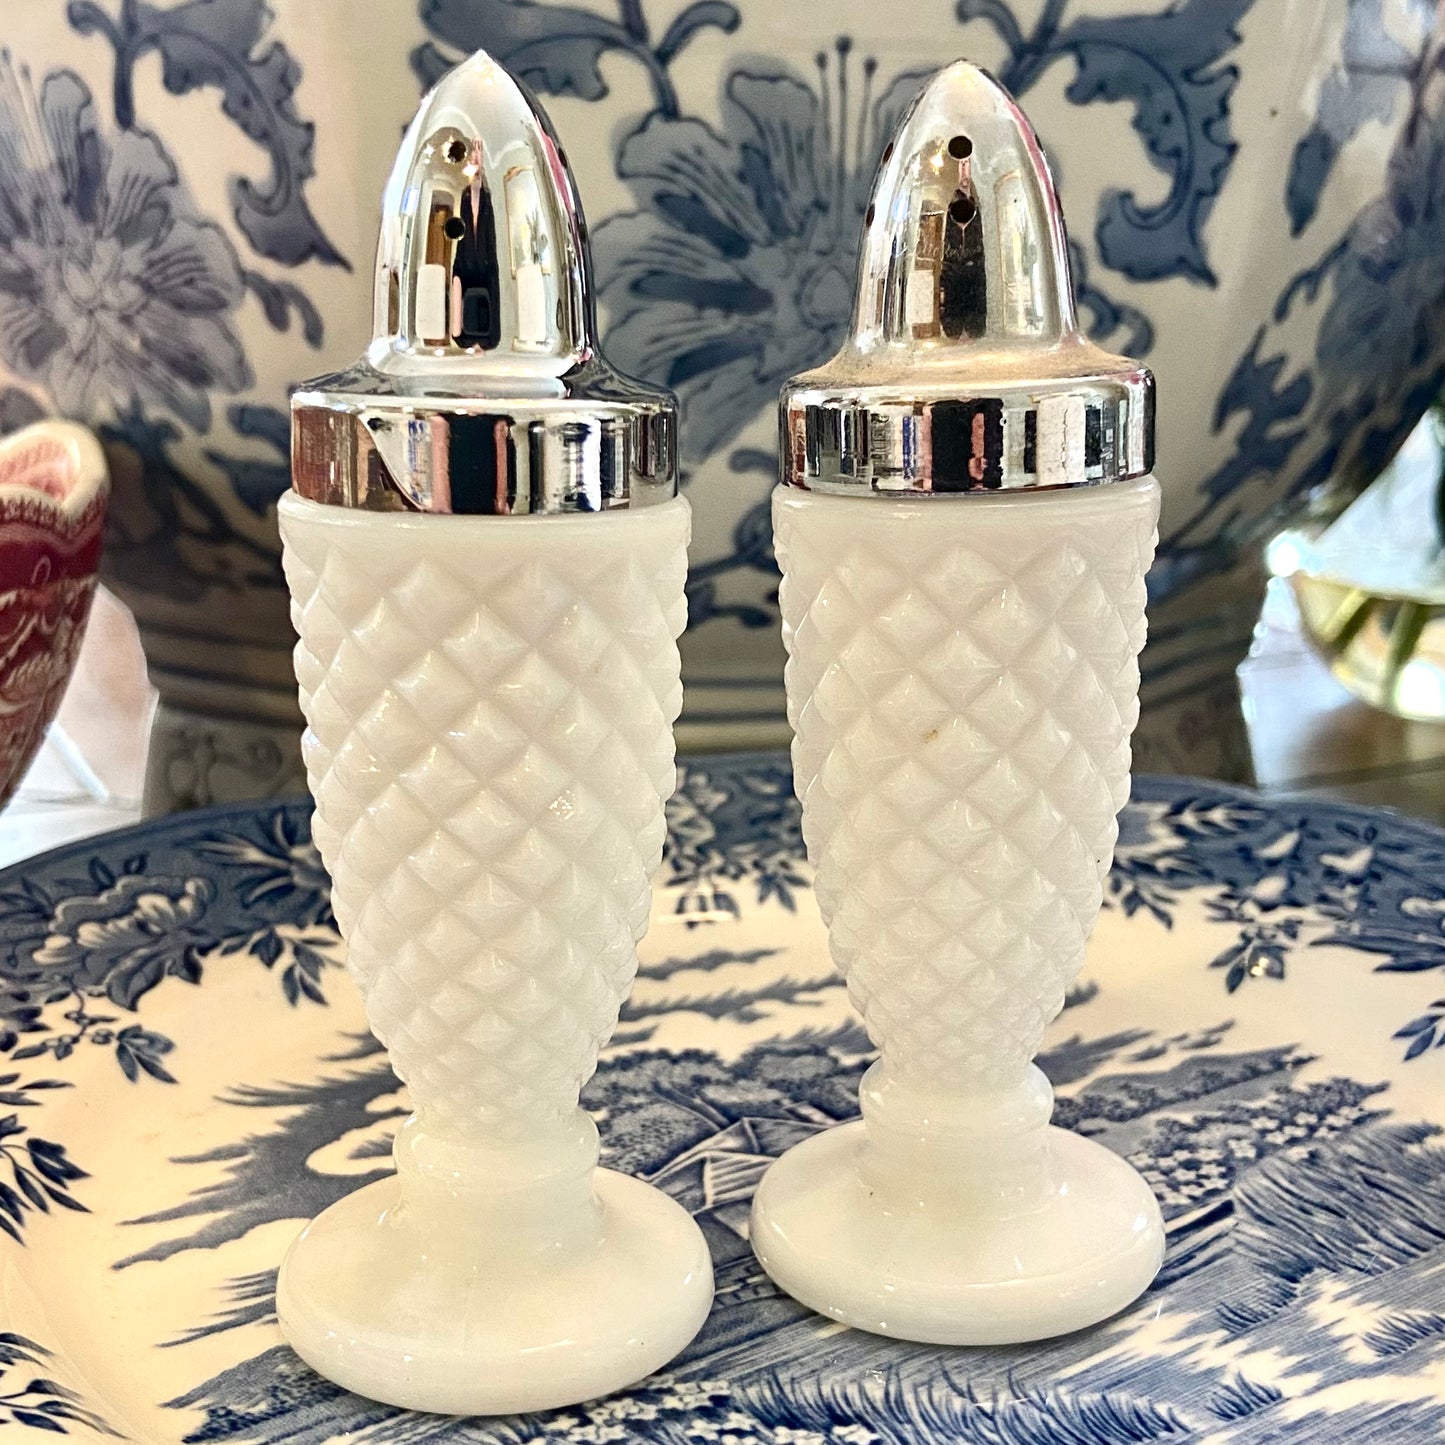 Vintage milk glass Sat and pepper shakers